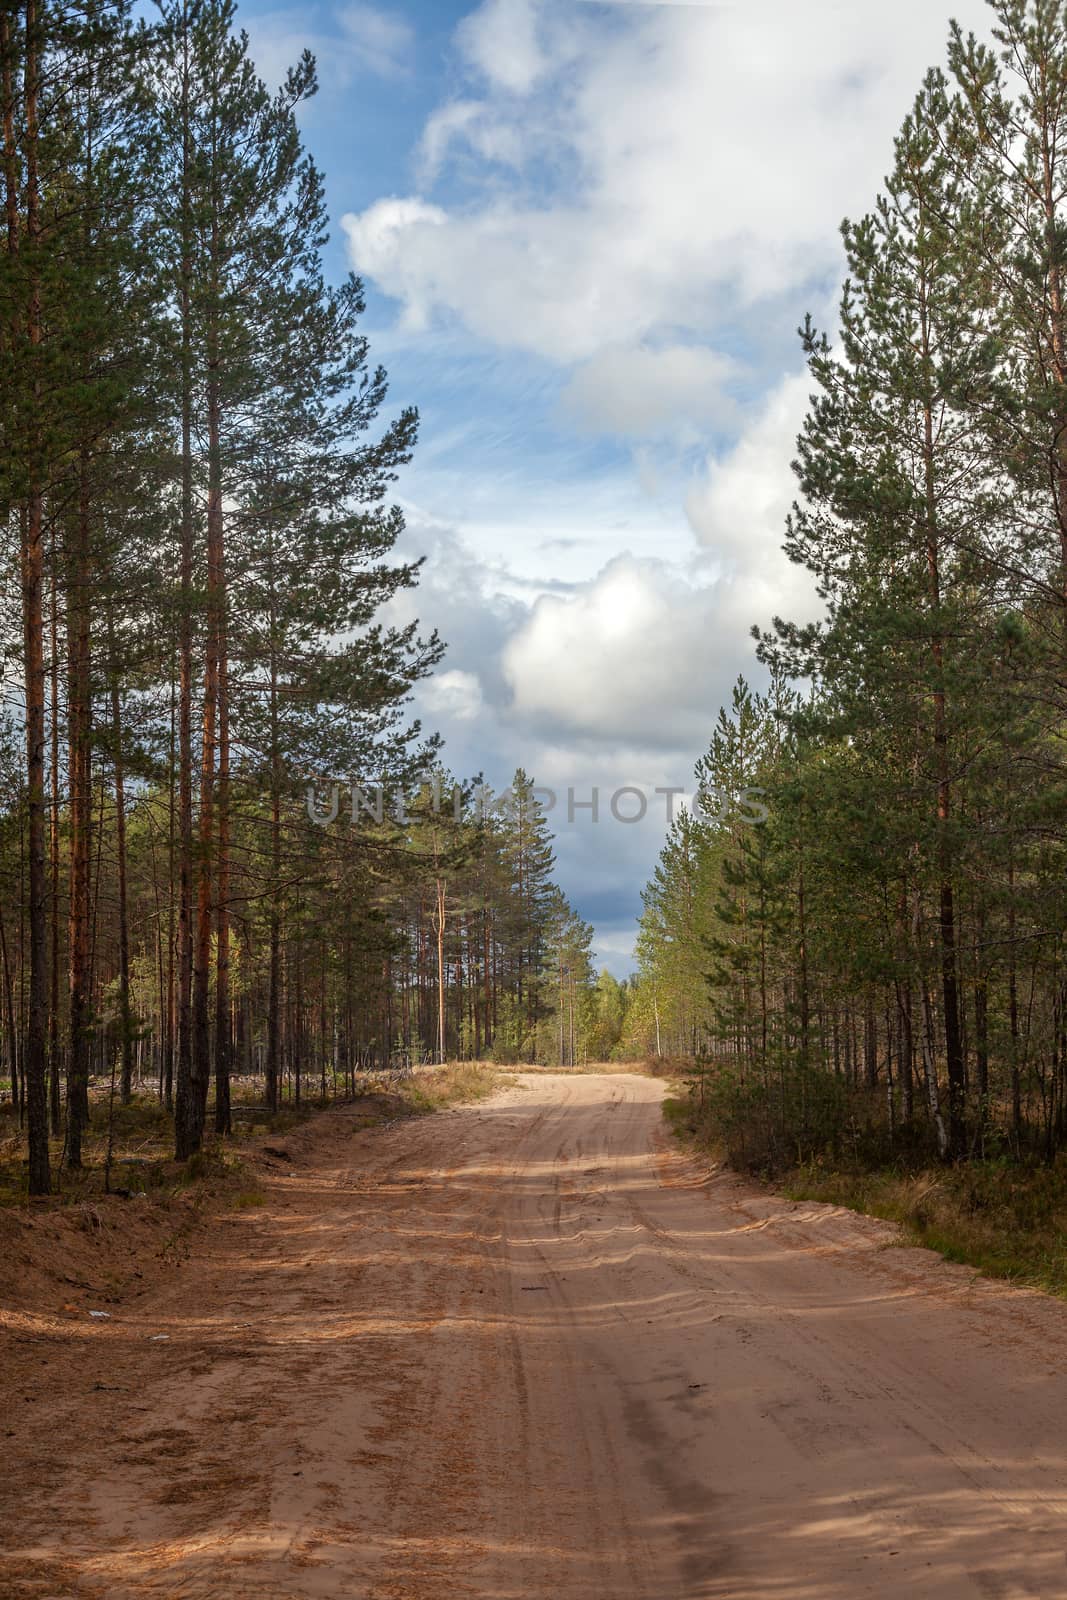 Sandy road in the pine forest by Angorius